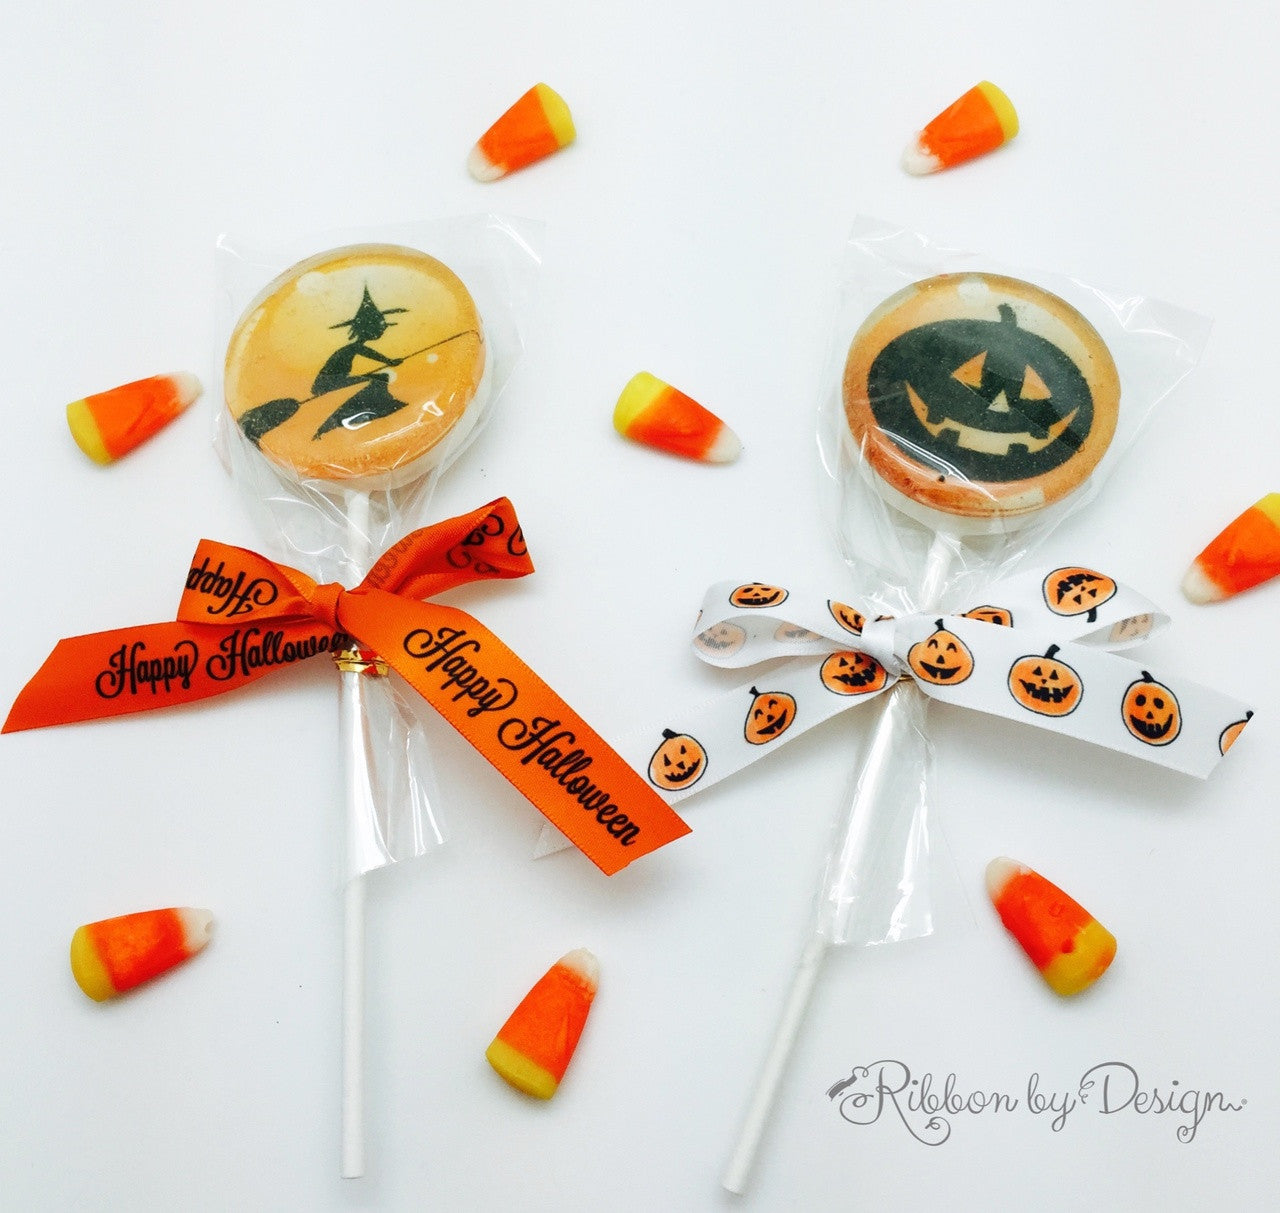 These sweet lollipops are all ready for Trick or Treaters!